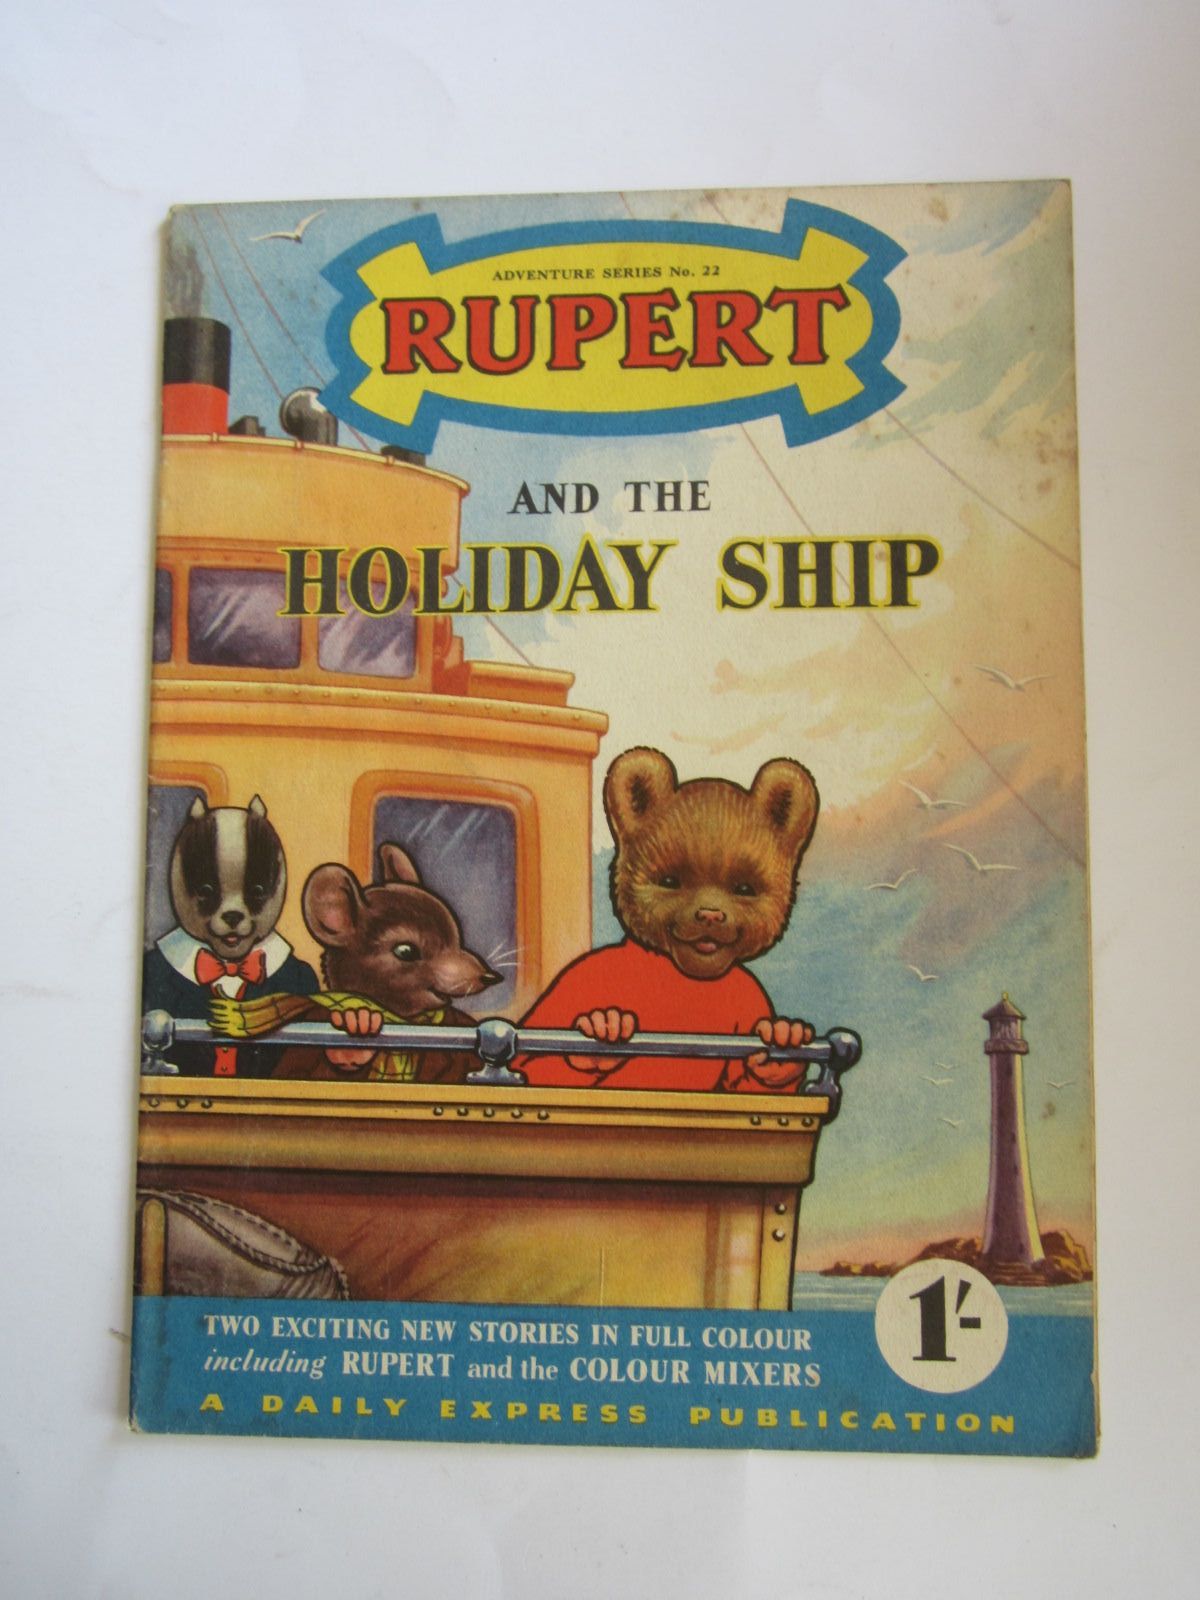 Photo of RUPERT ADVENTURE SERIES No. 22 - RUPERT AND THE HOLIDAY SHIP written by Bestall, Alfred published by Daily Express (STOCK CODE: 1206521)  for sale by Stella & Rose's Books